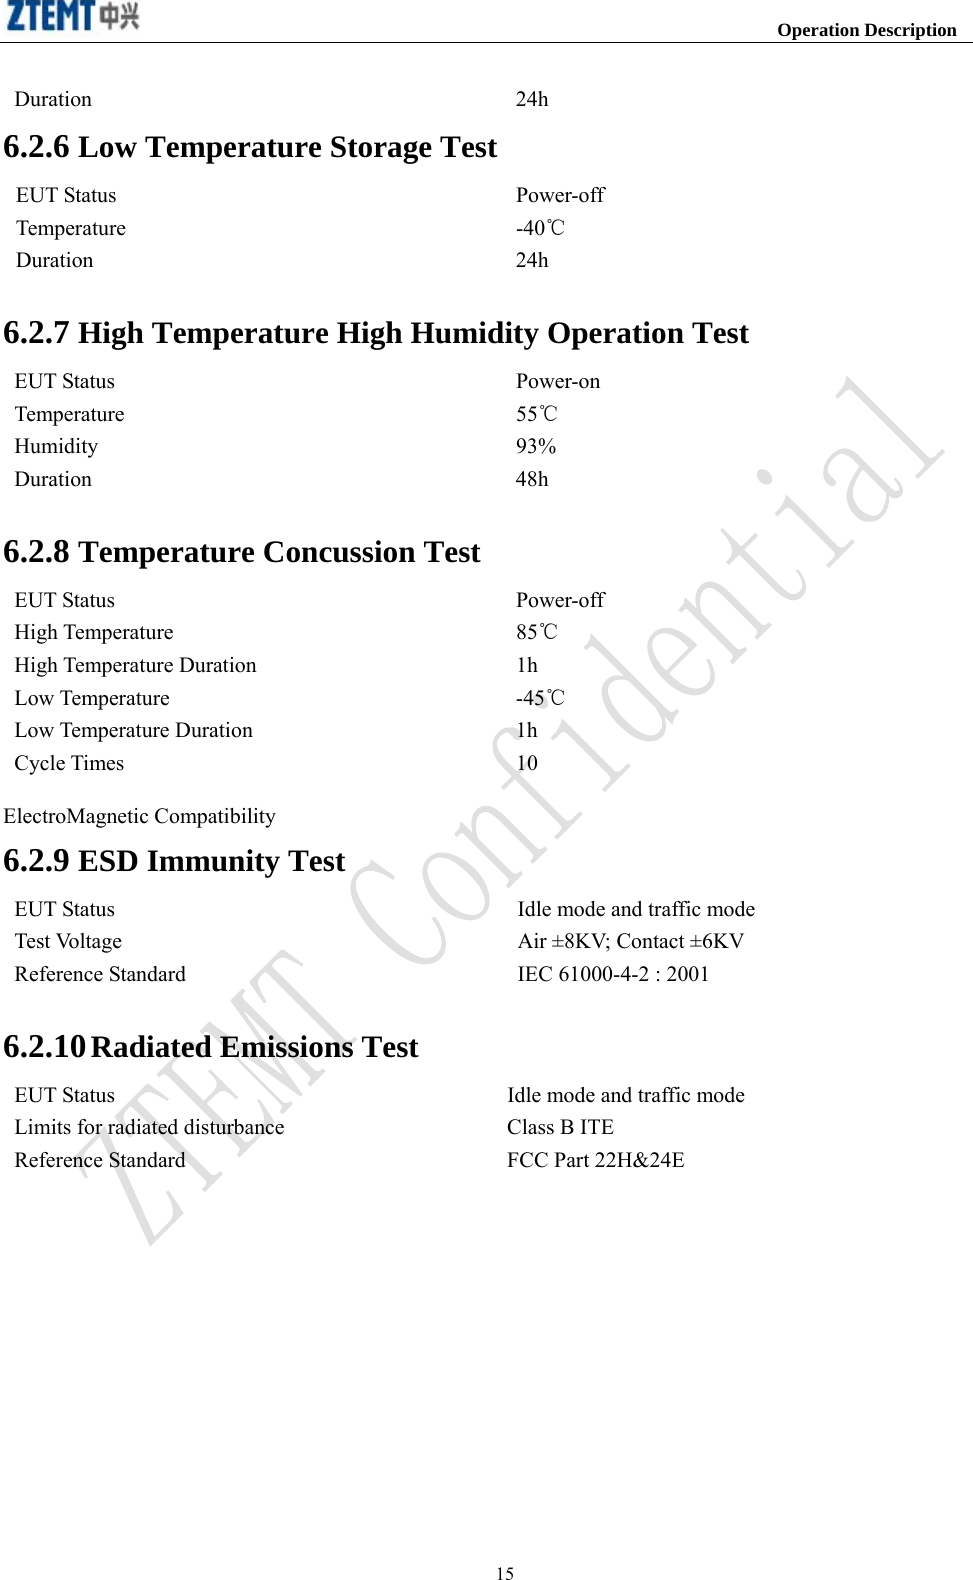                                                                     Operation Description  15Duration 24h 6.2.6 Low Temperature Storage Test EUT Status  Power-off Temperature -40℃ Duration 24h  6.2.7 High Temperature High Humidity Operation Test EUT Status  Power-on Temperature 55℃ Humidity 93% Duration 48h  6.2.8 Temperature Concussion Test EUT Status  Power-off High Temperature  85℃ High Temperature Duration  1h Low Temperature  -45℃ Low Temperature Duration  1h Cycle Times  10  ElectroMagnetic Compatibility   6.2.9 ESD Immunity Test EUT Status  Idle mode and traffic mode Test Voltage  Air ±8KV; Contact ±6KV Reference Standard  IEC 61000-4-2 : 2001  6.2.10 Radiated Emissions Test EUT Status  Idle mode and traffic mode Limits for radiated disturbance  Class B ITE   Reference Standard  FCC Part 22H&amp;24E    